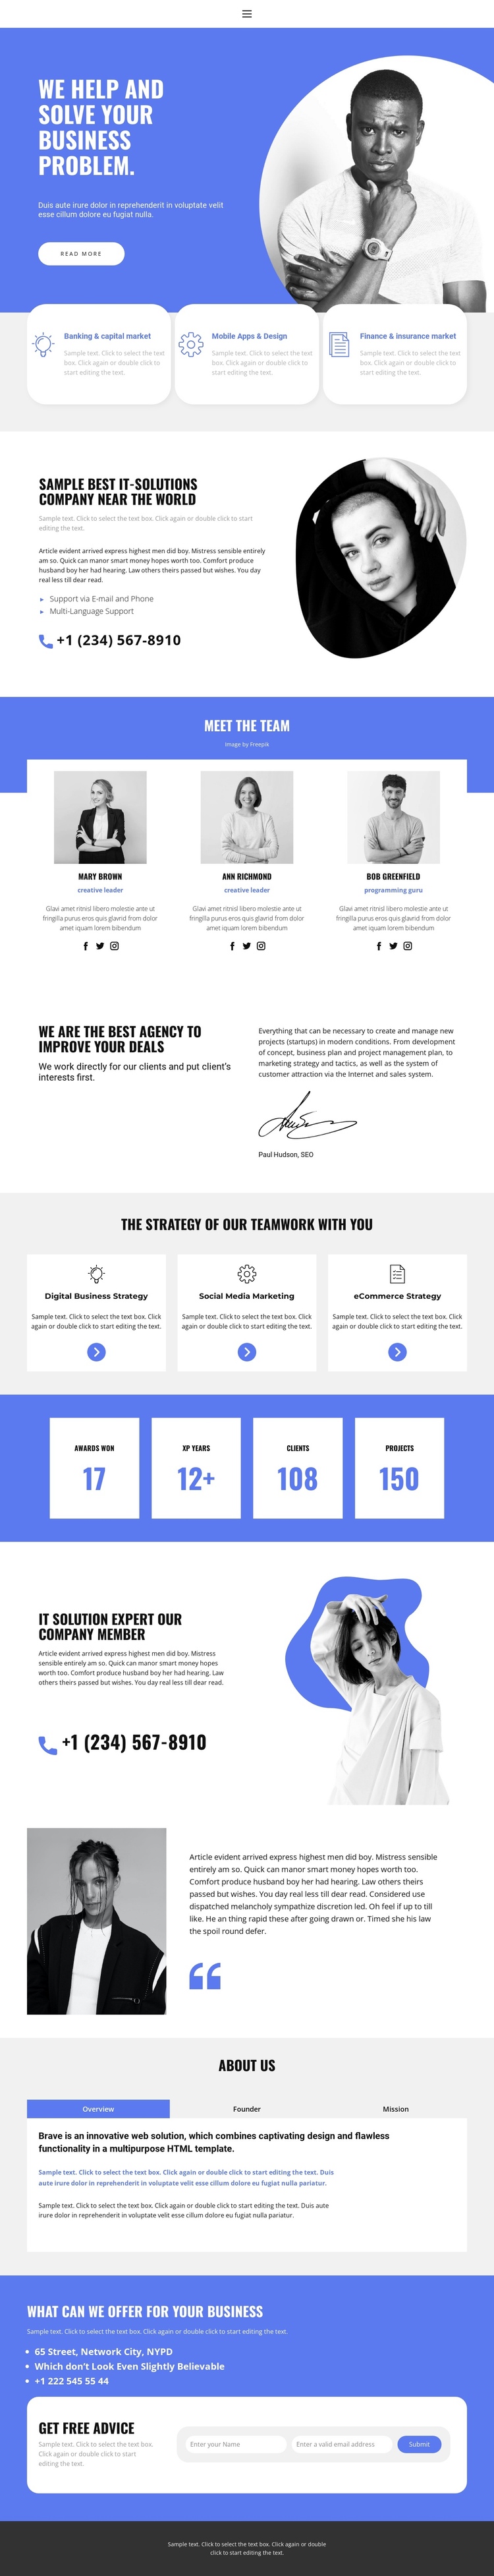 Business page design One Page Template